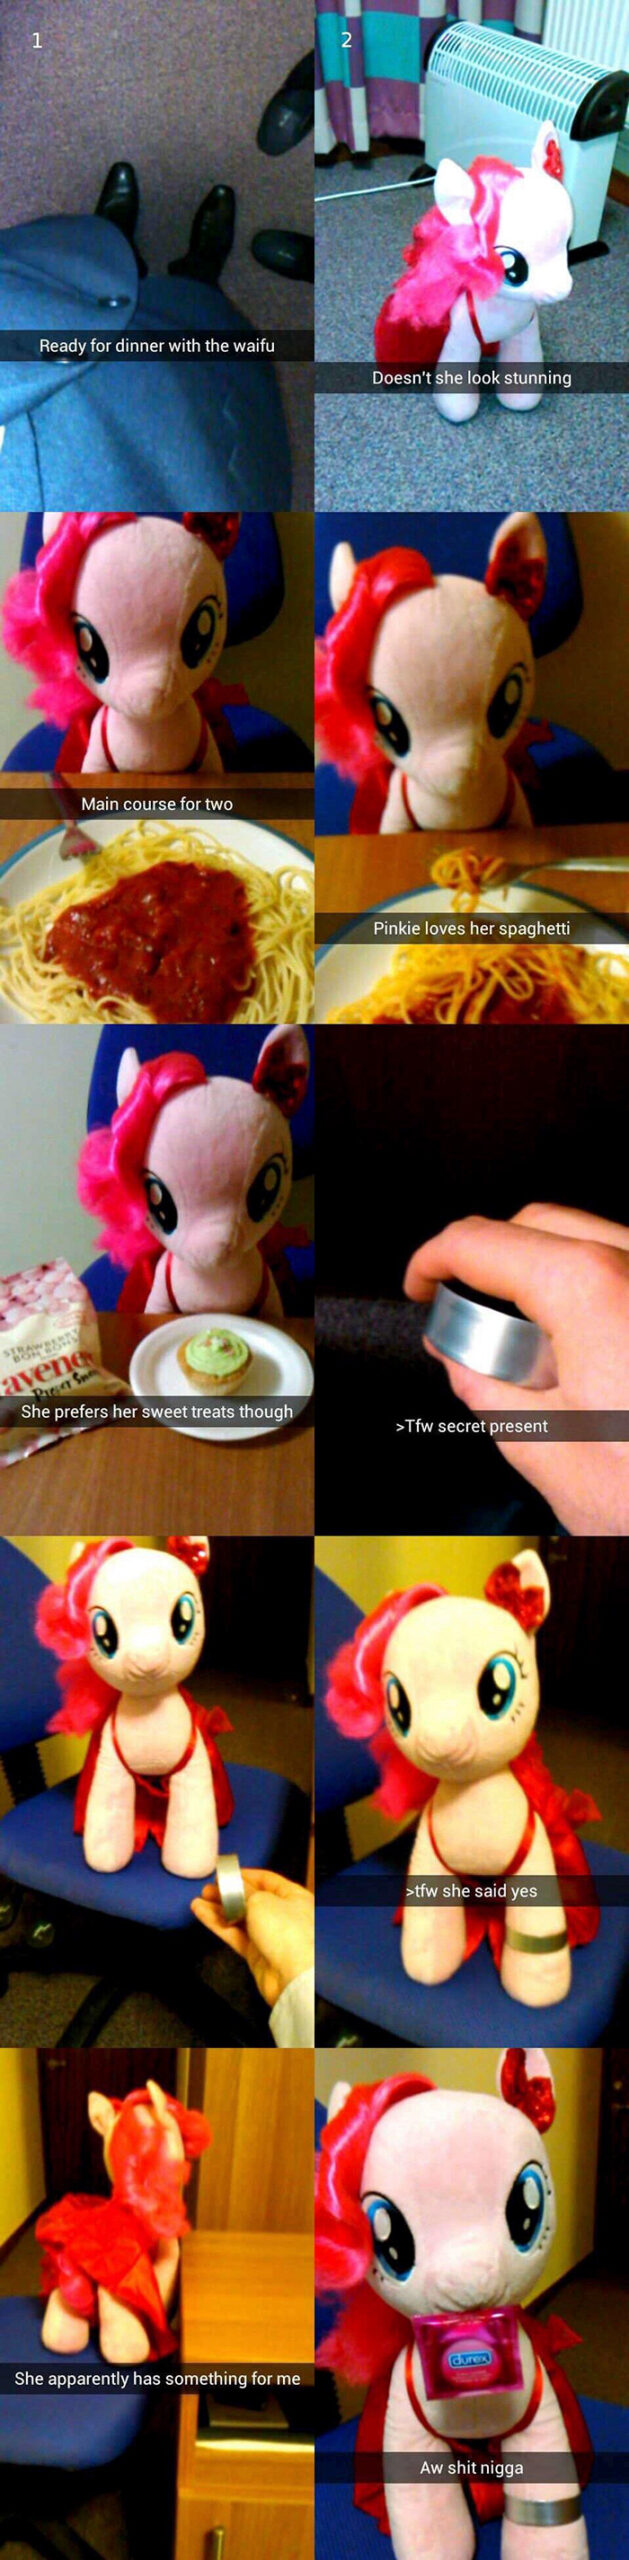 cringe pics - pinkie pie plush cringe - 1 2 Ready for dinner with the waifu Doesn't she look stunning Main course for two Pinkie loves her spaghetti 2 avend Res She prefers her sweet treats though >Tfw secret present >tfw she said yes Cure She apparently 